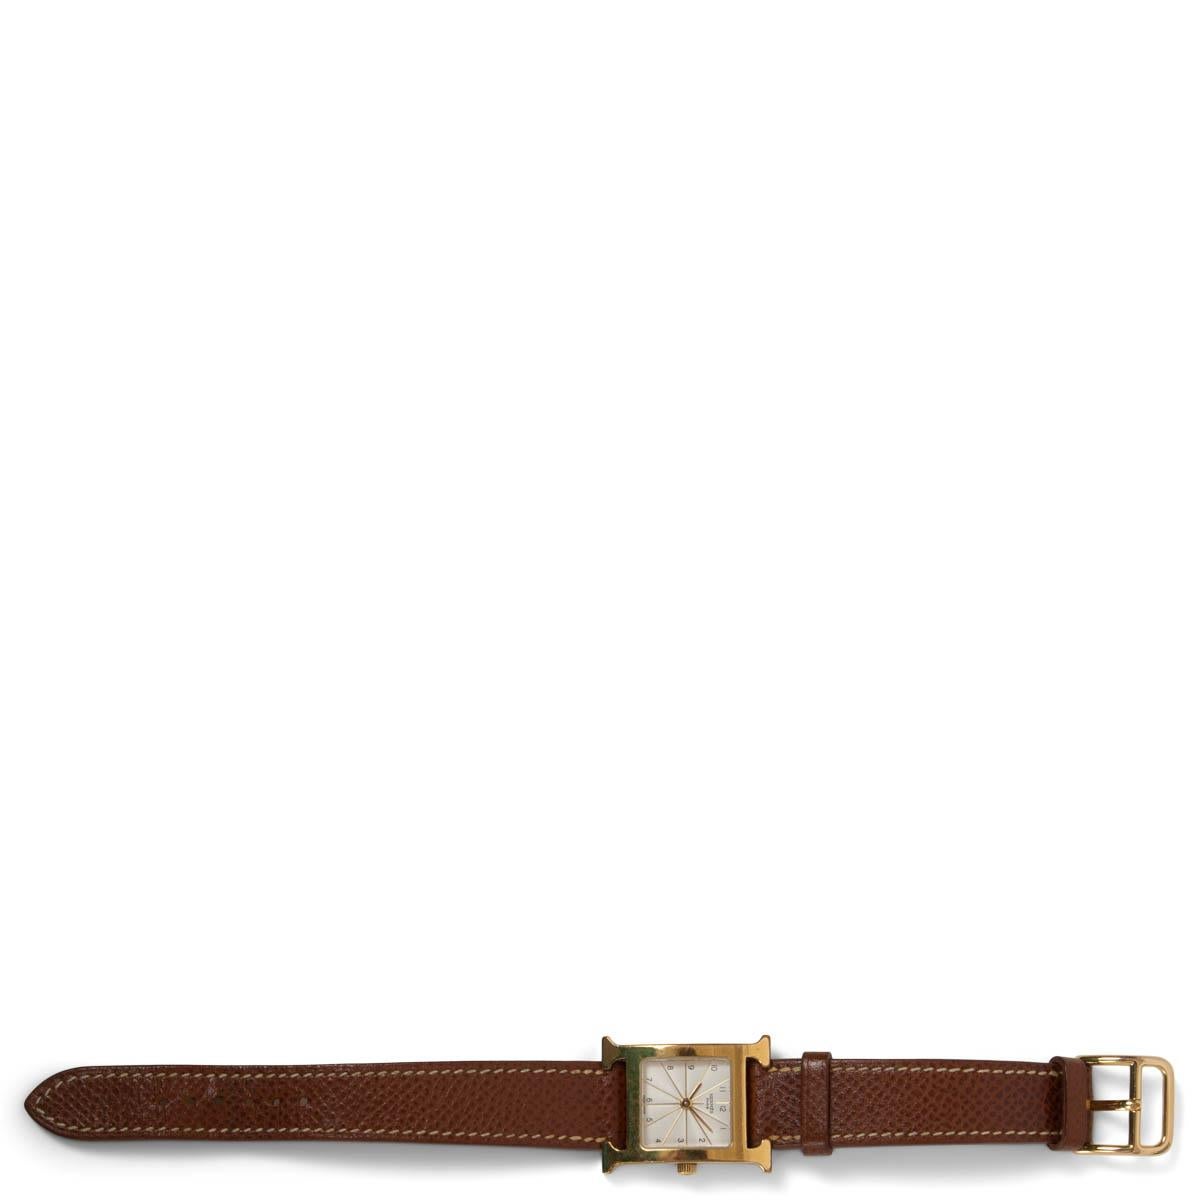 100% authentic Hermès 2001 Heute H 17.2 x 17.2 mm in yellow gold plated steel with off-white white dial, long interchangeable strap in brown Epsom calfskin. Quartz movement, Swiss Made. Has been worn and the leather strap shows some patina and